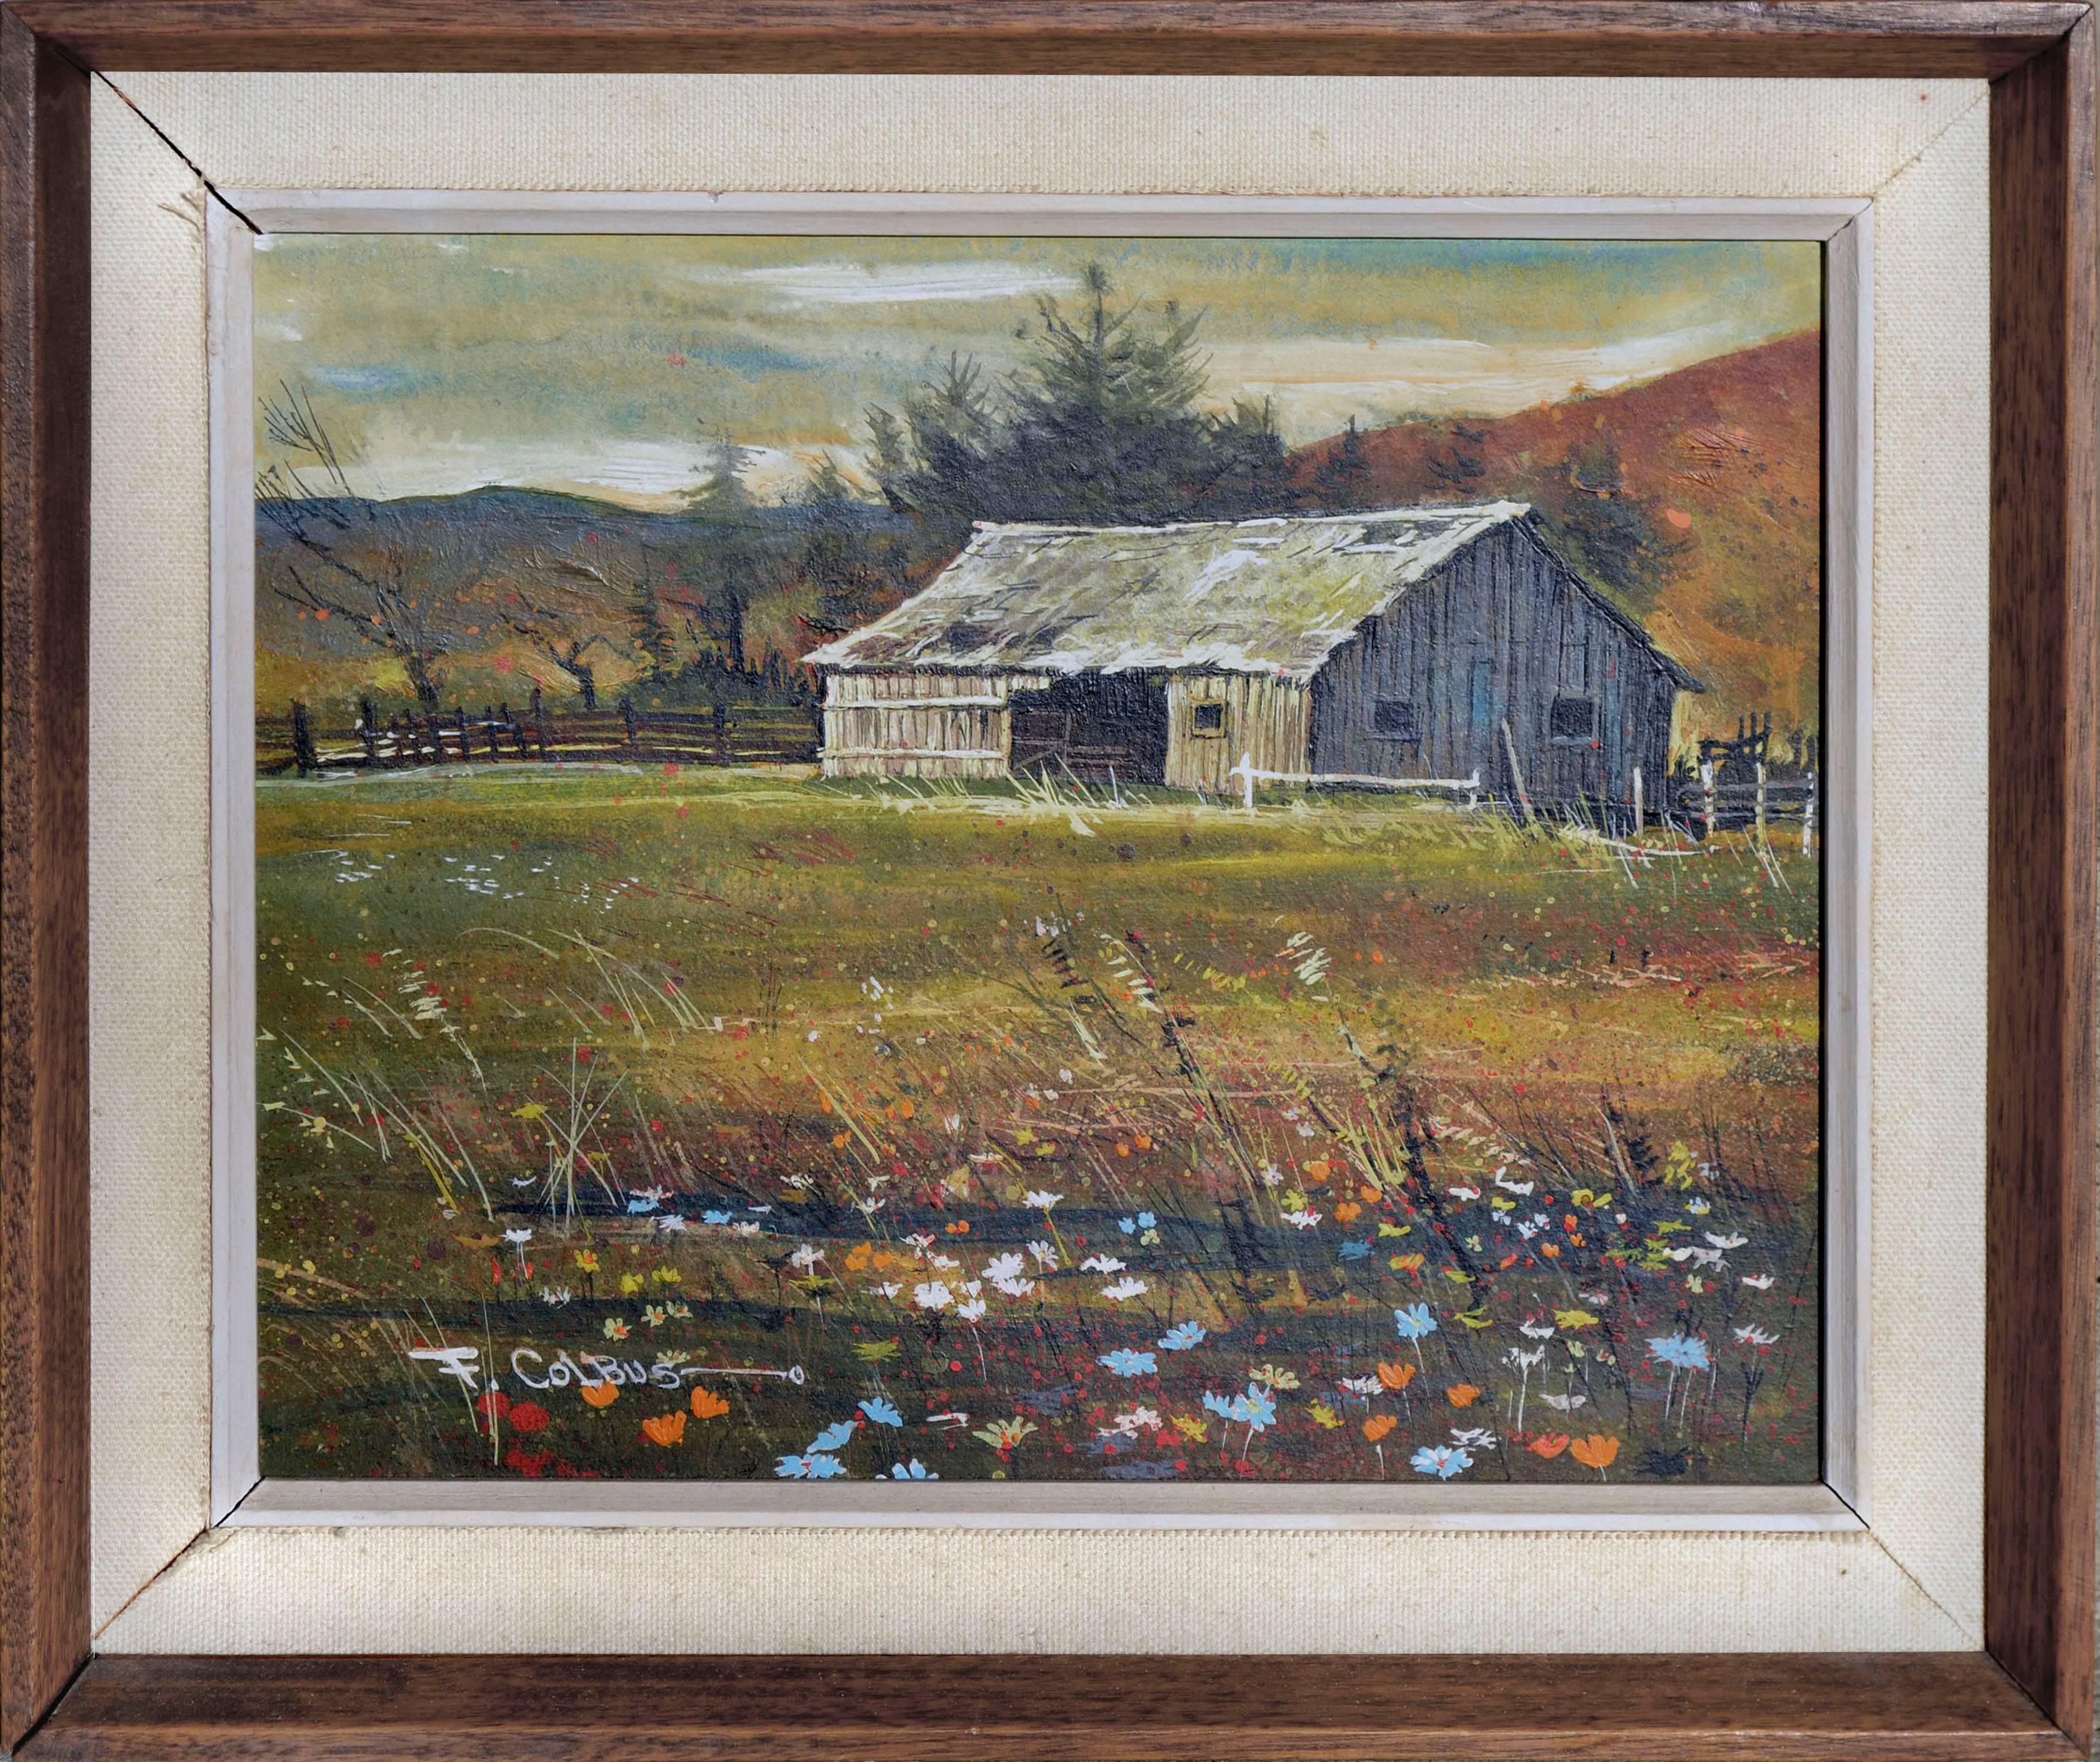 Frederick Colbus Landscape Painting - Countryside Barn with Wildflowers Landscape 